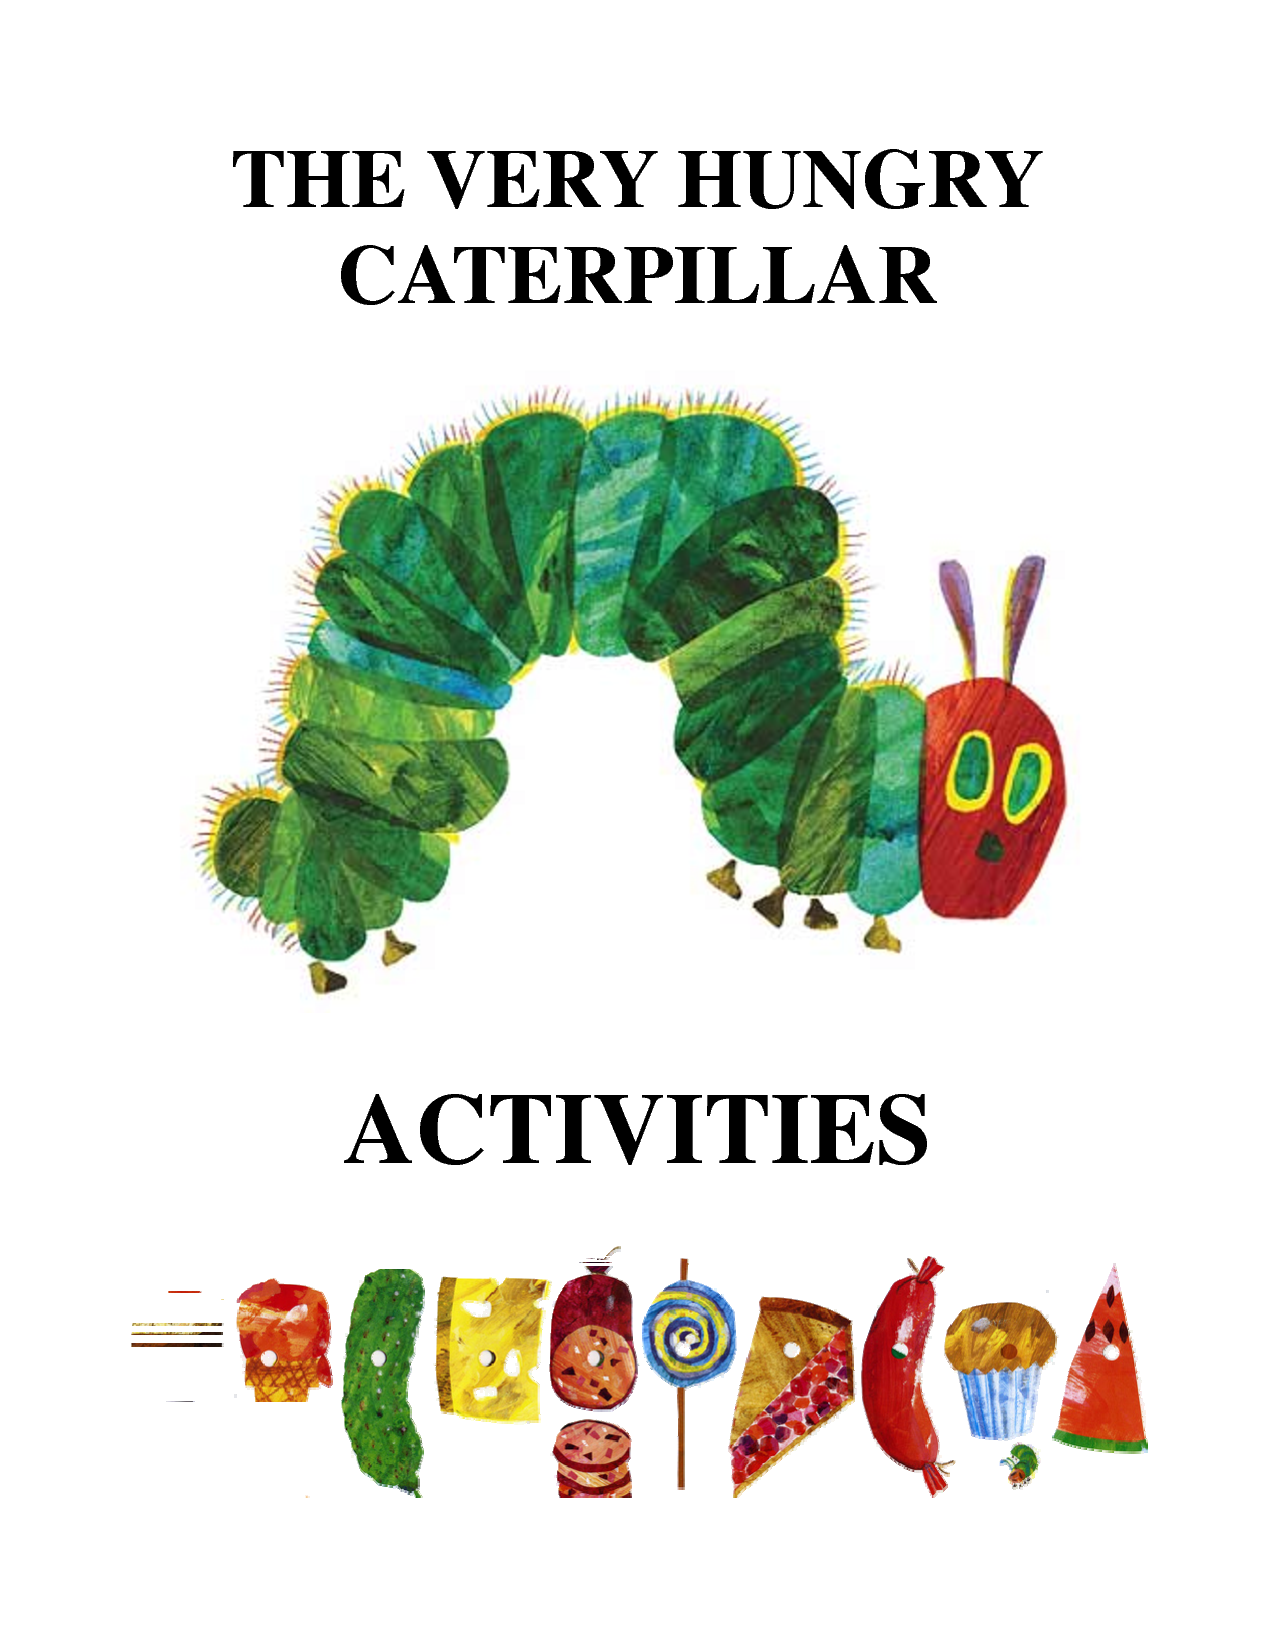 "The Very Hungry Caterpillar Activities" clipart free image download